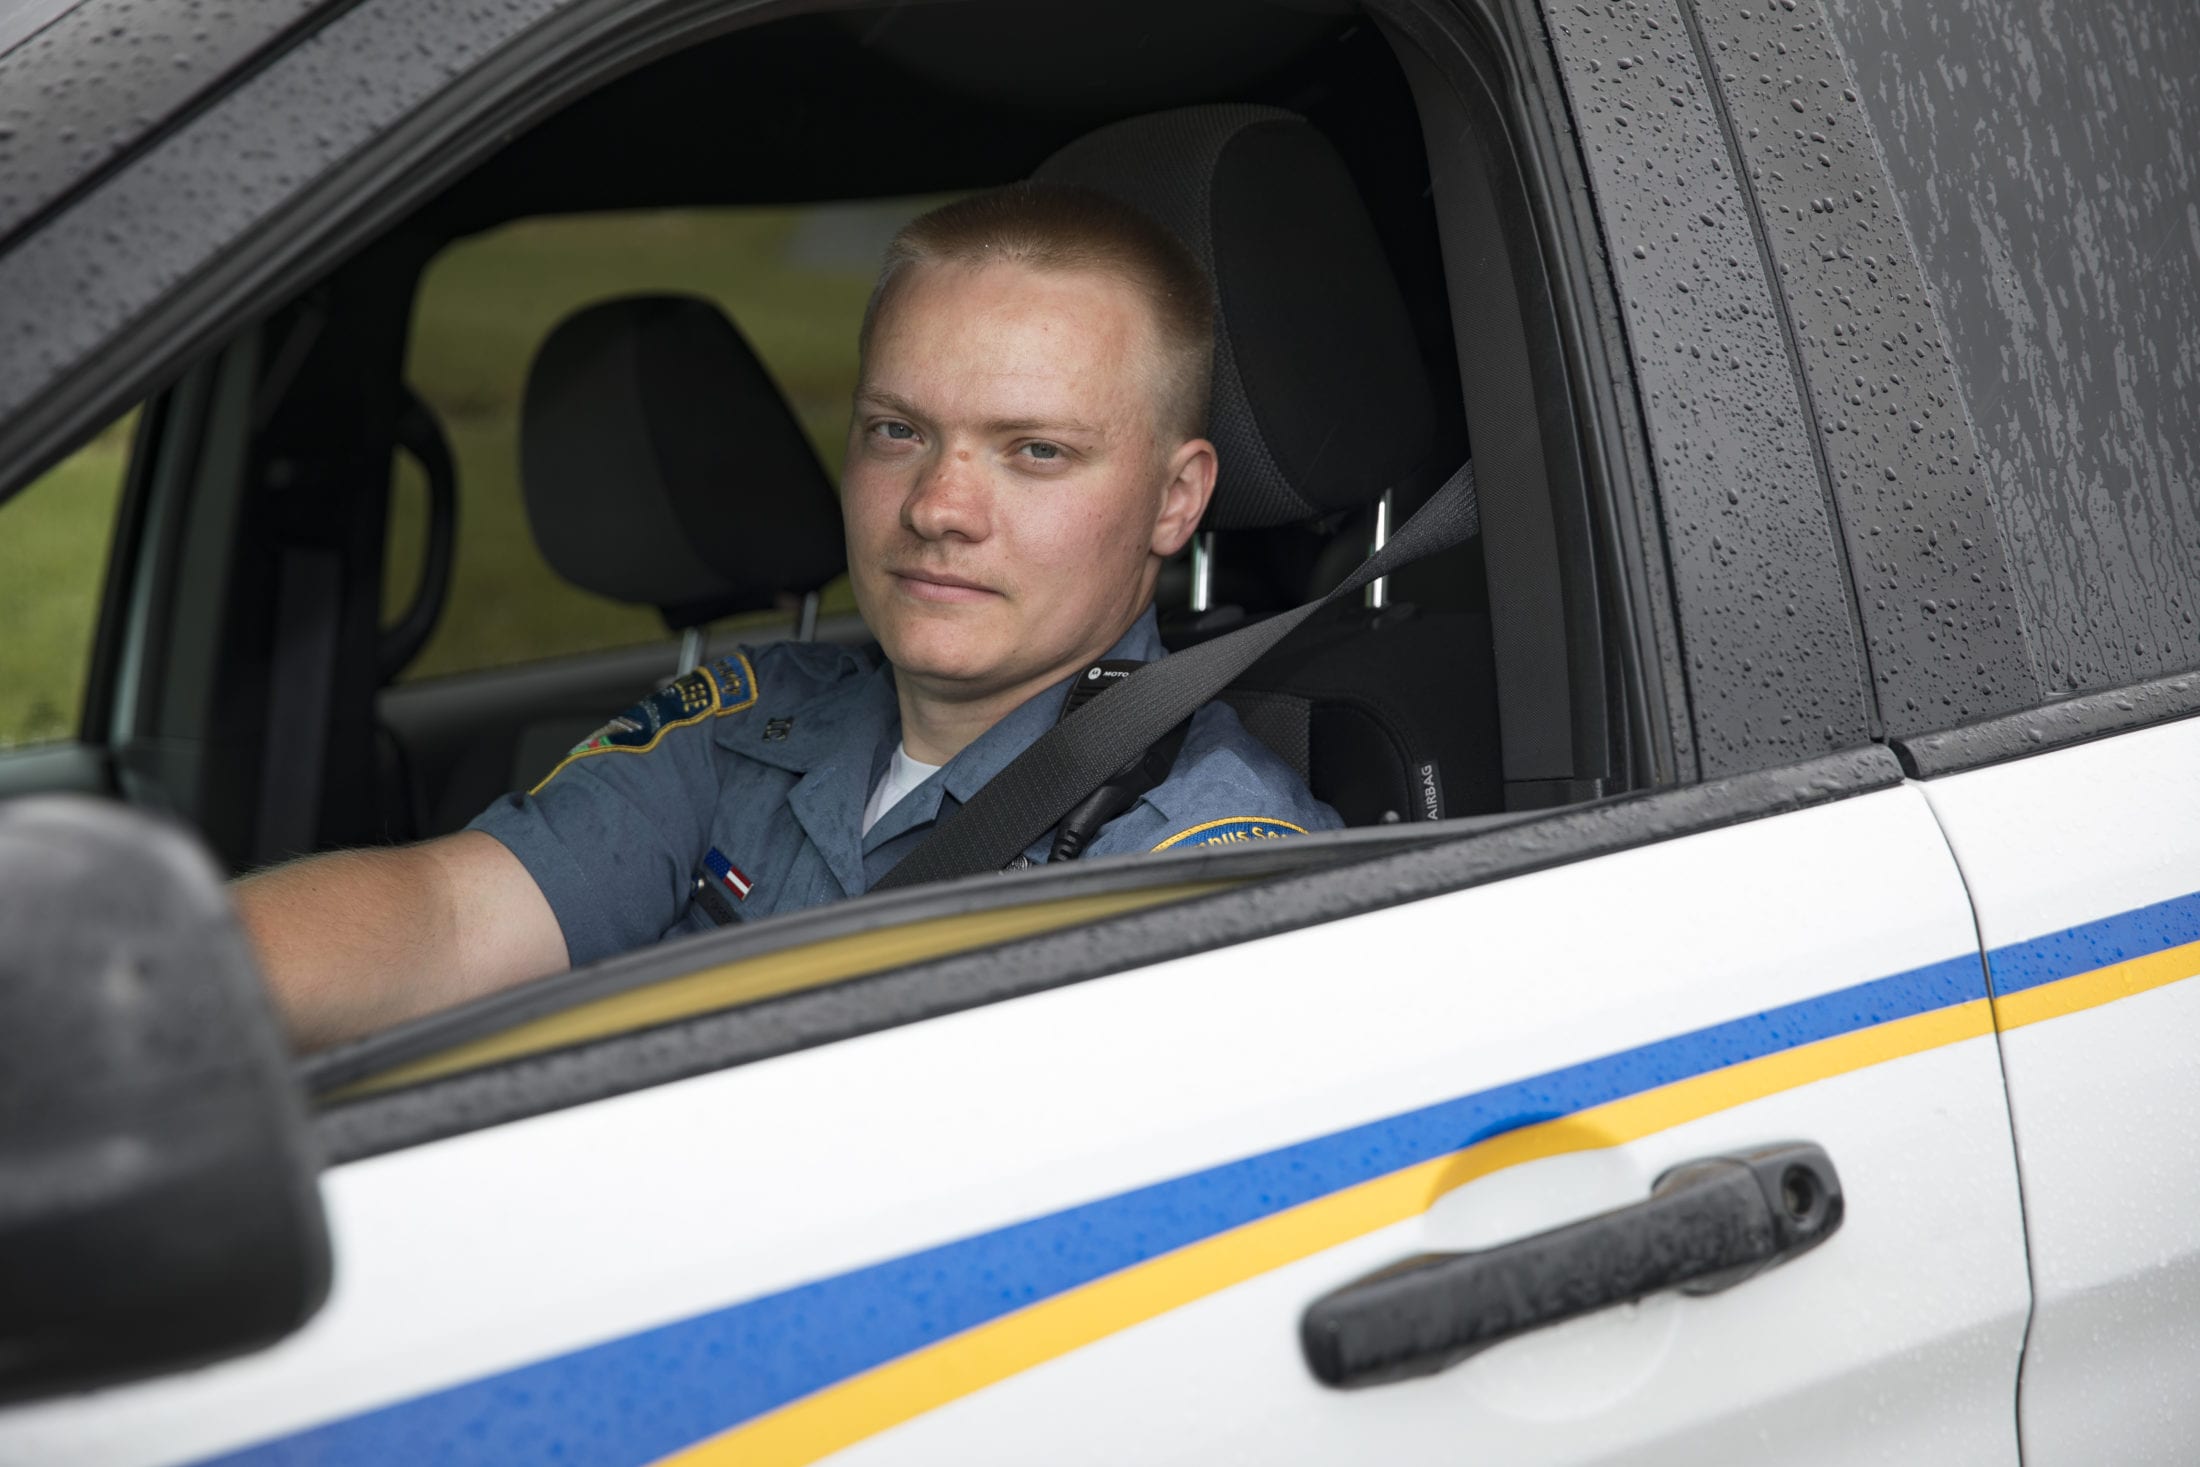 On Patrol: Joe gets a solid start on his law enforcement career – even before graduation